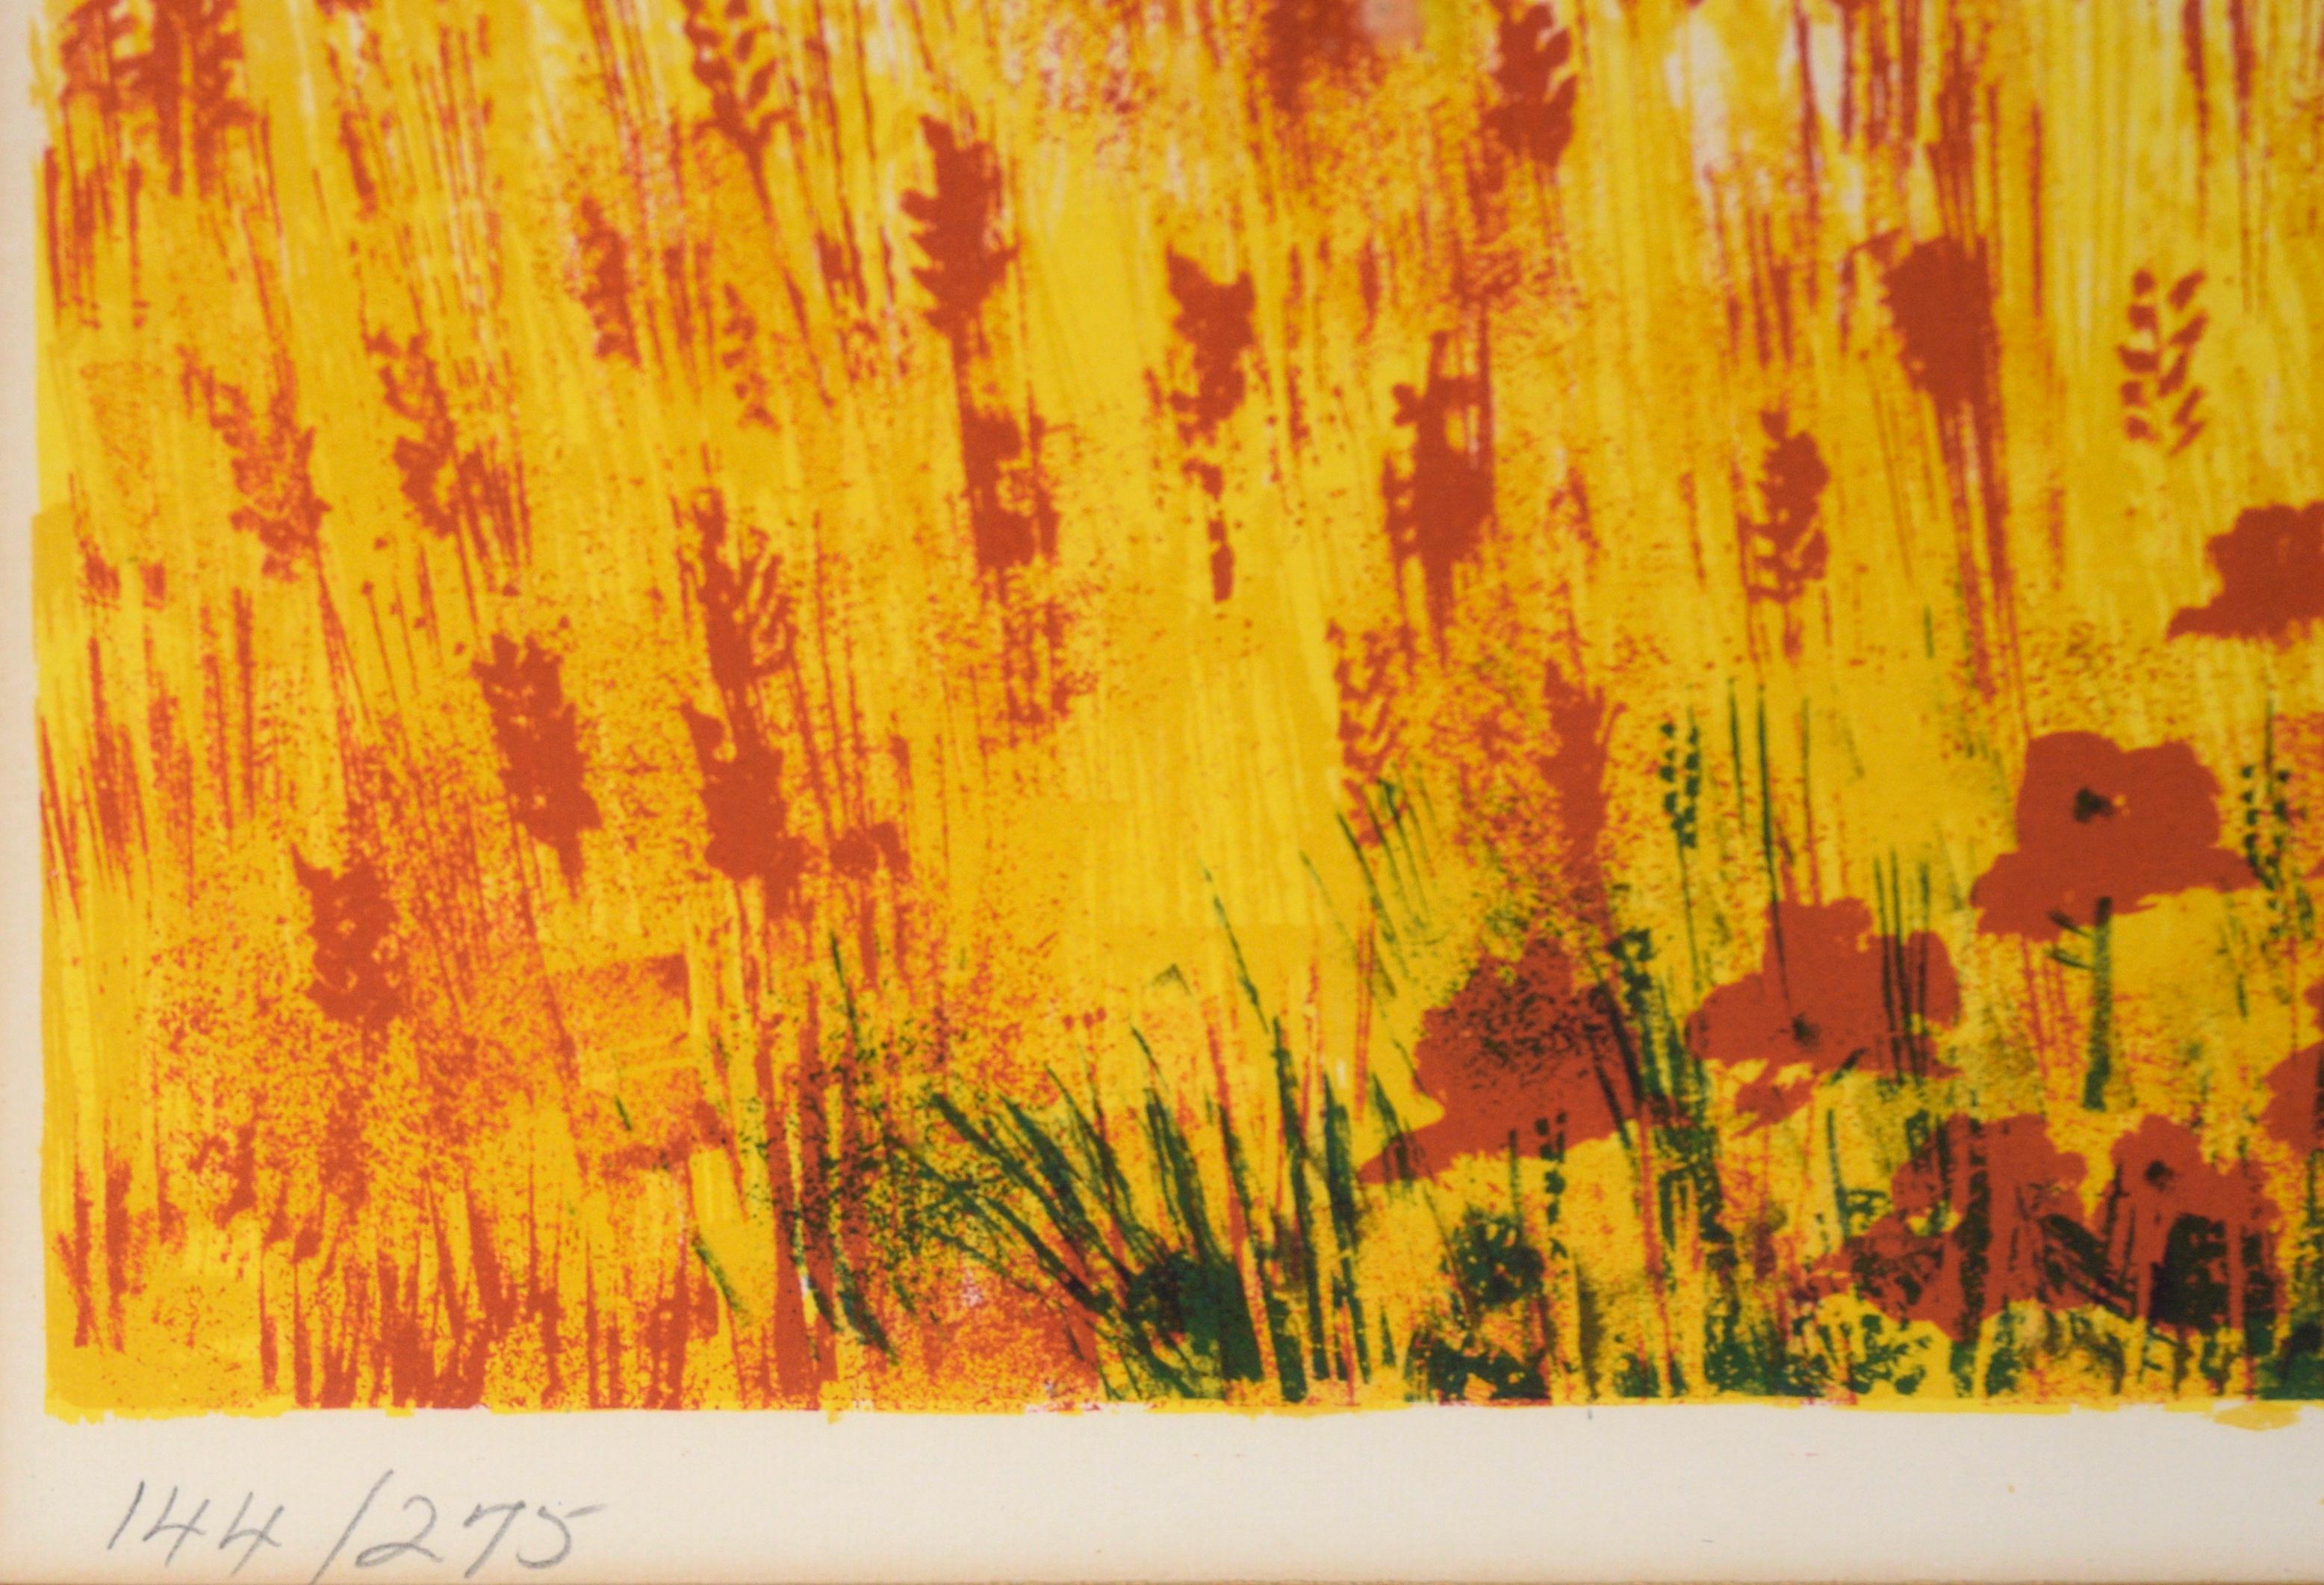 Farmhouse and the Wheat Field at Sunset - Landscape Lithograph in Ink on Paper For Sale 2